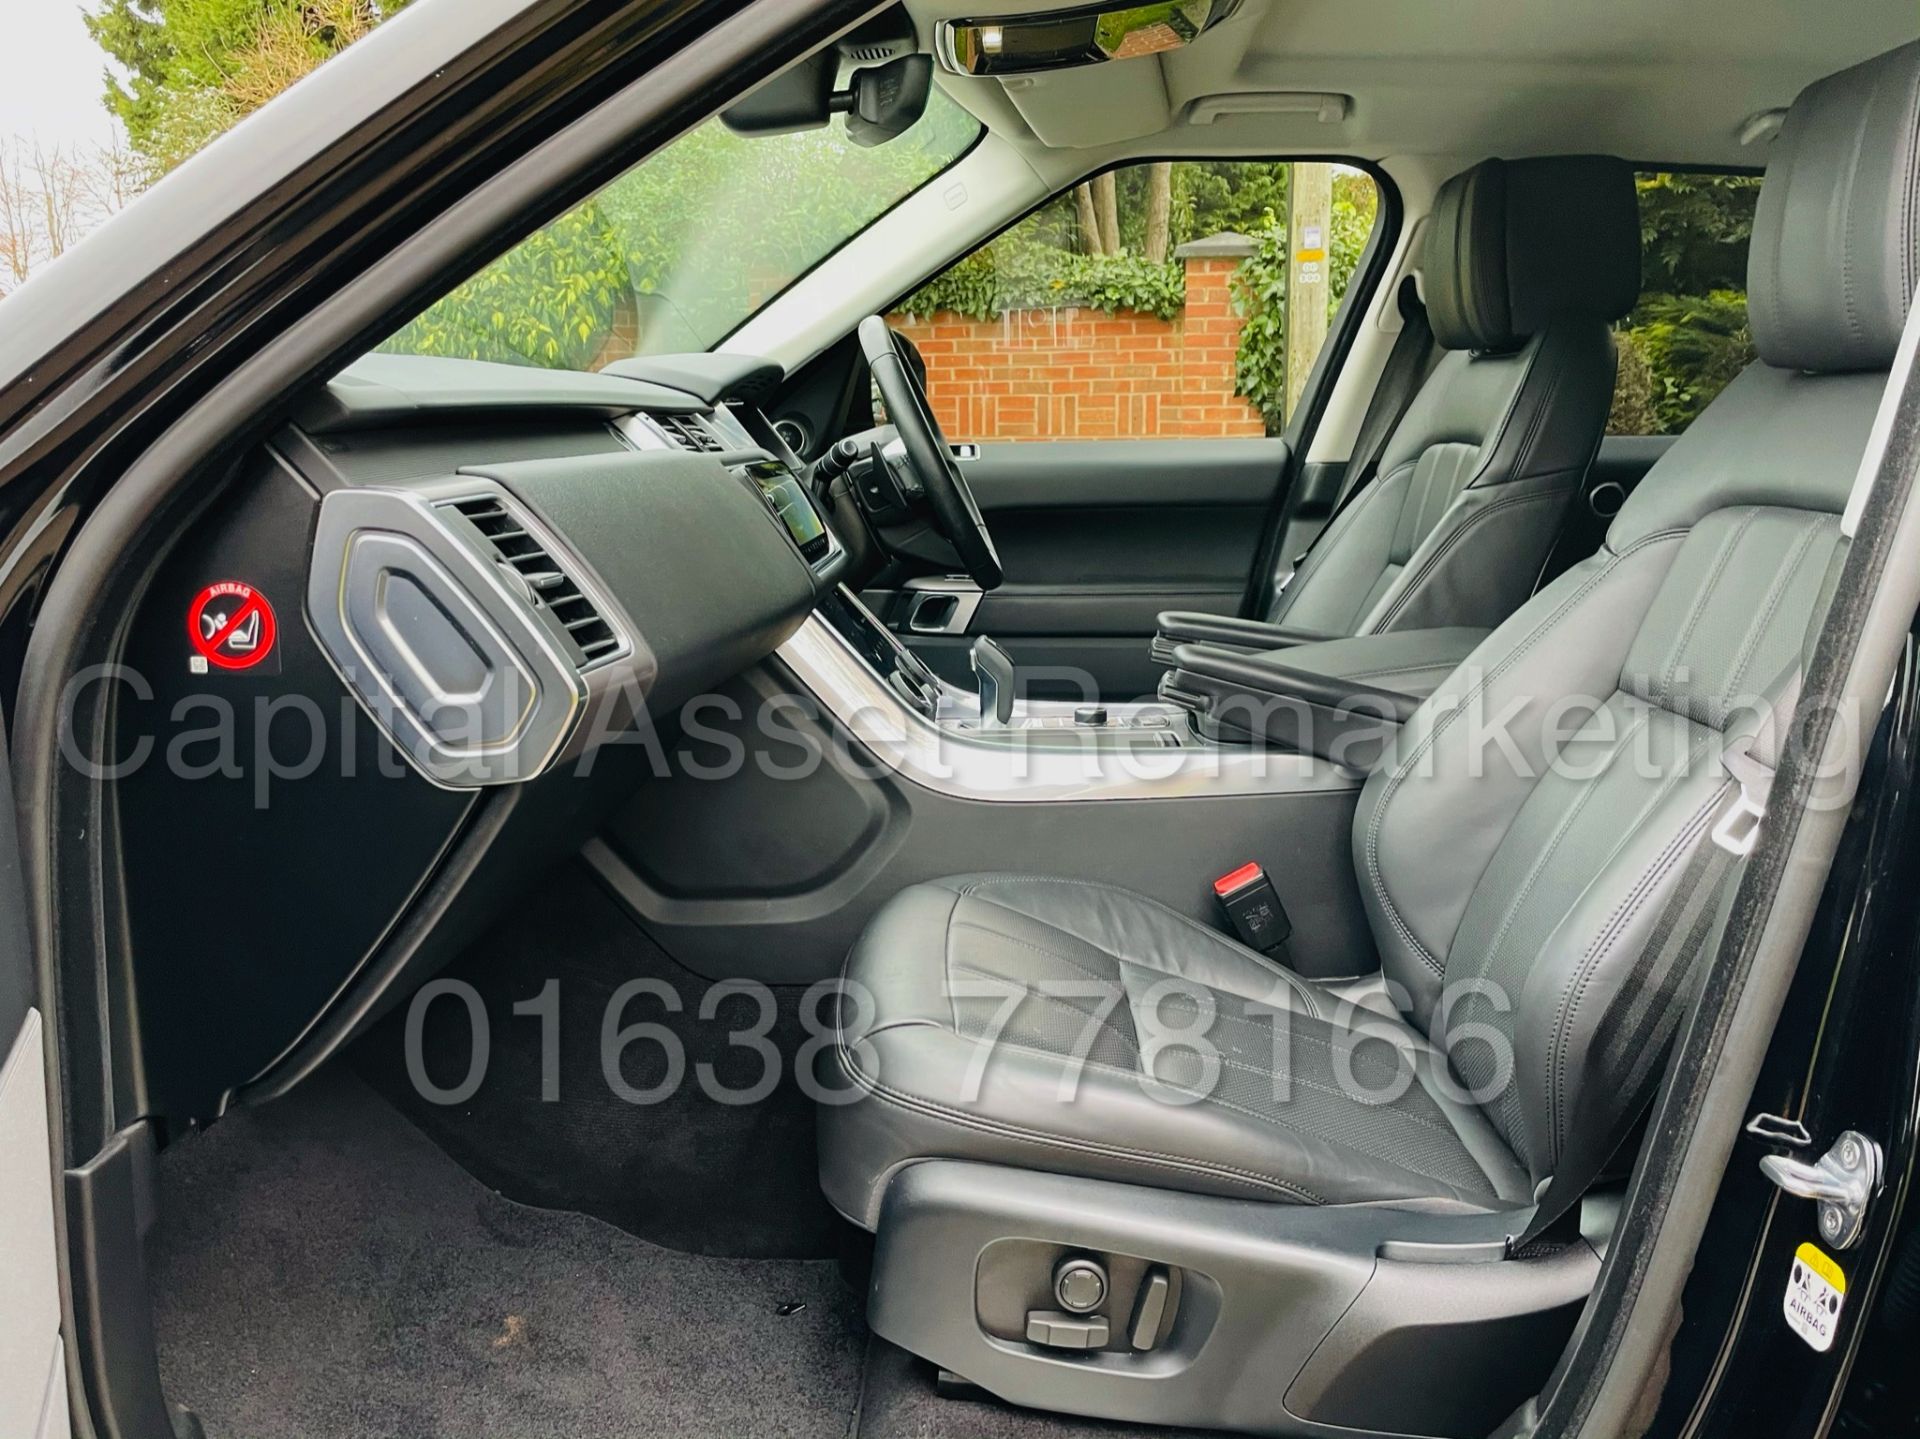 RANGE ROVER SPORT *HSE EDITION* SUV (2019 MODEL) '3.0 SDV6 - 306 BHP - 8 SPEED AUTO' *FULLY LOADED* - Image 24 of 56